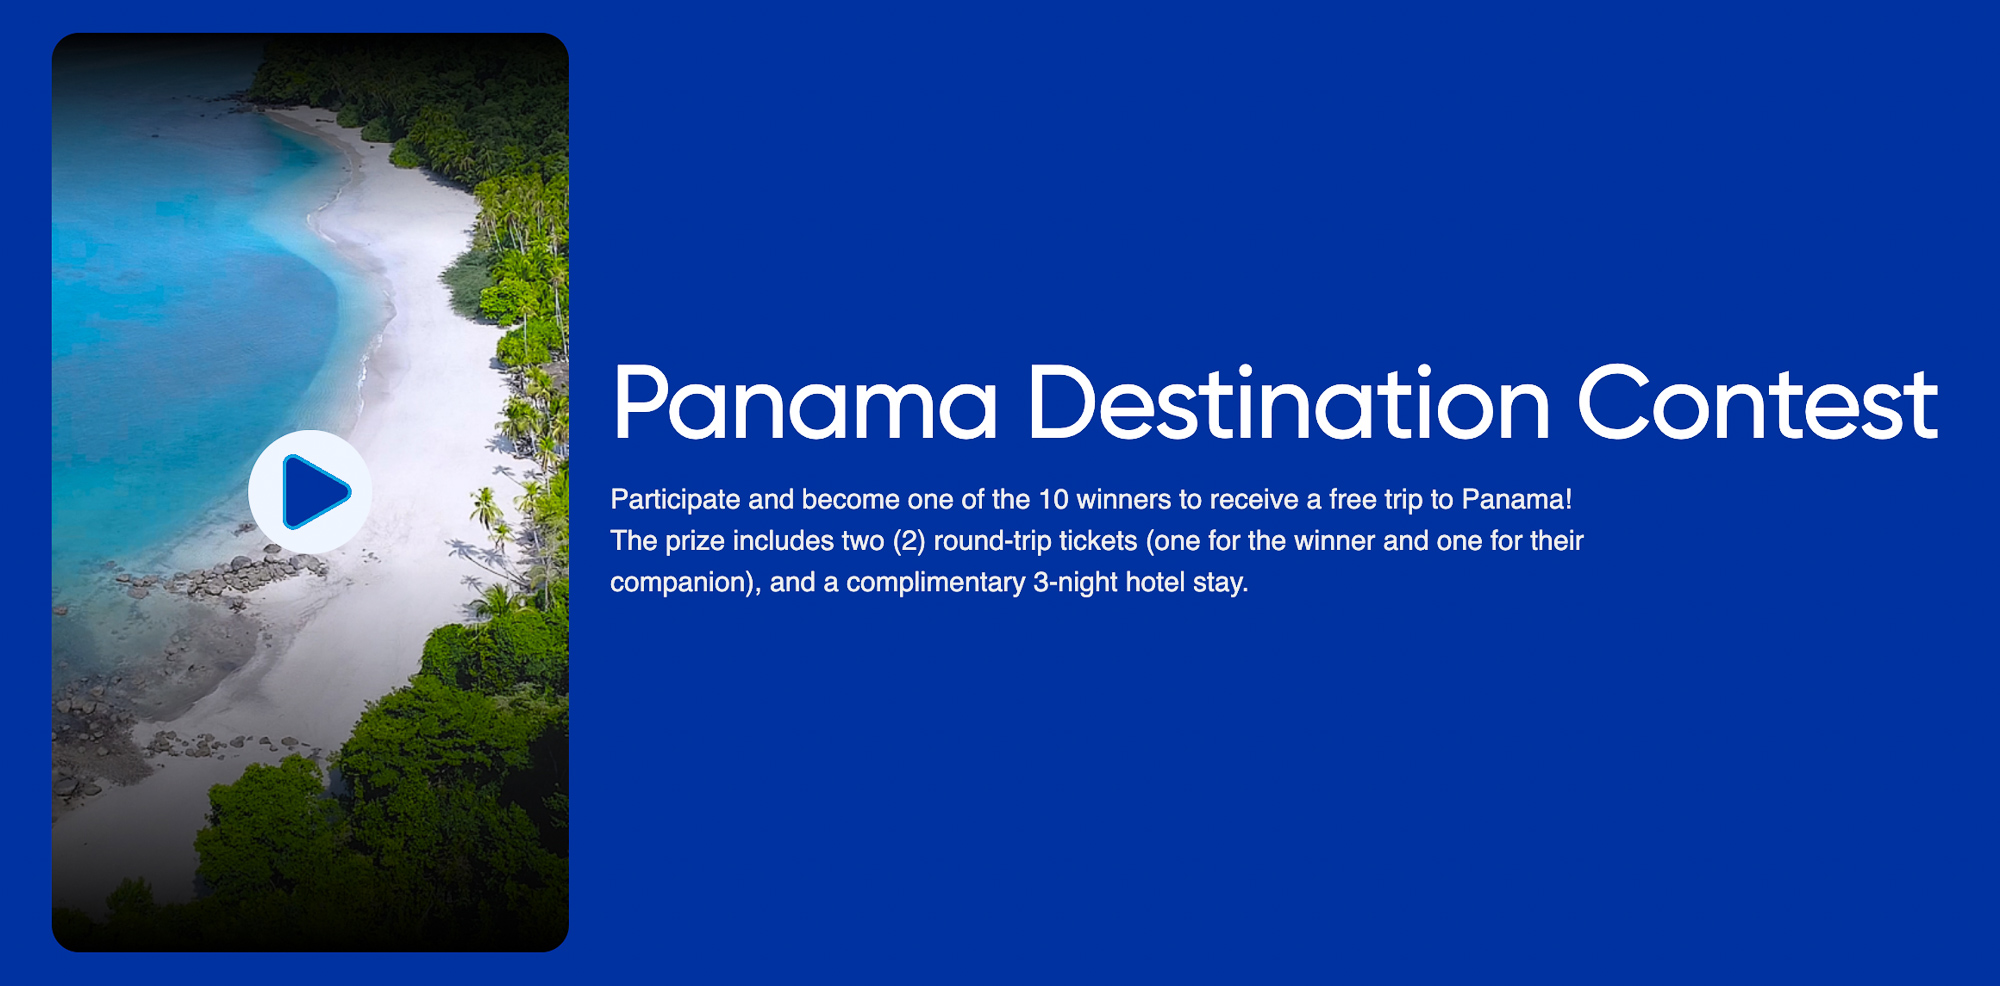 Destination Panama Awaits: Win a Dream Trip with Copa Airlines! – There Will Be 10 Winners